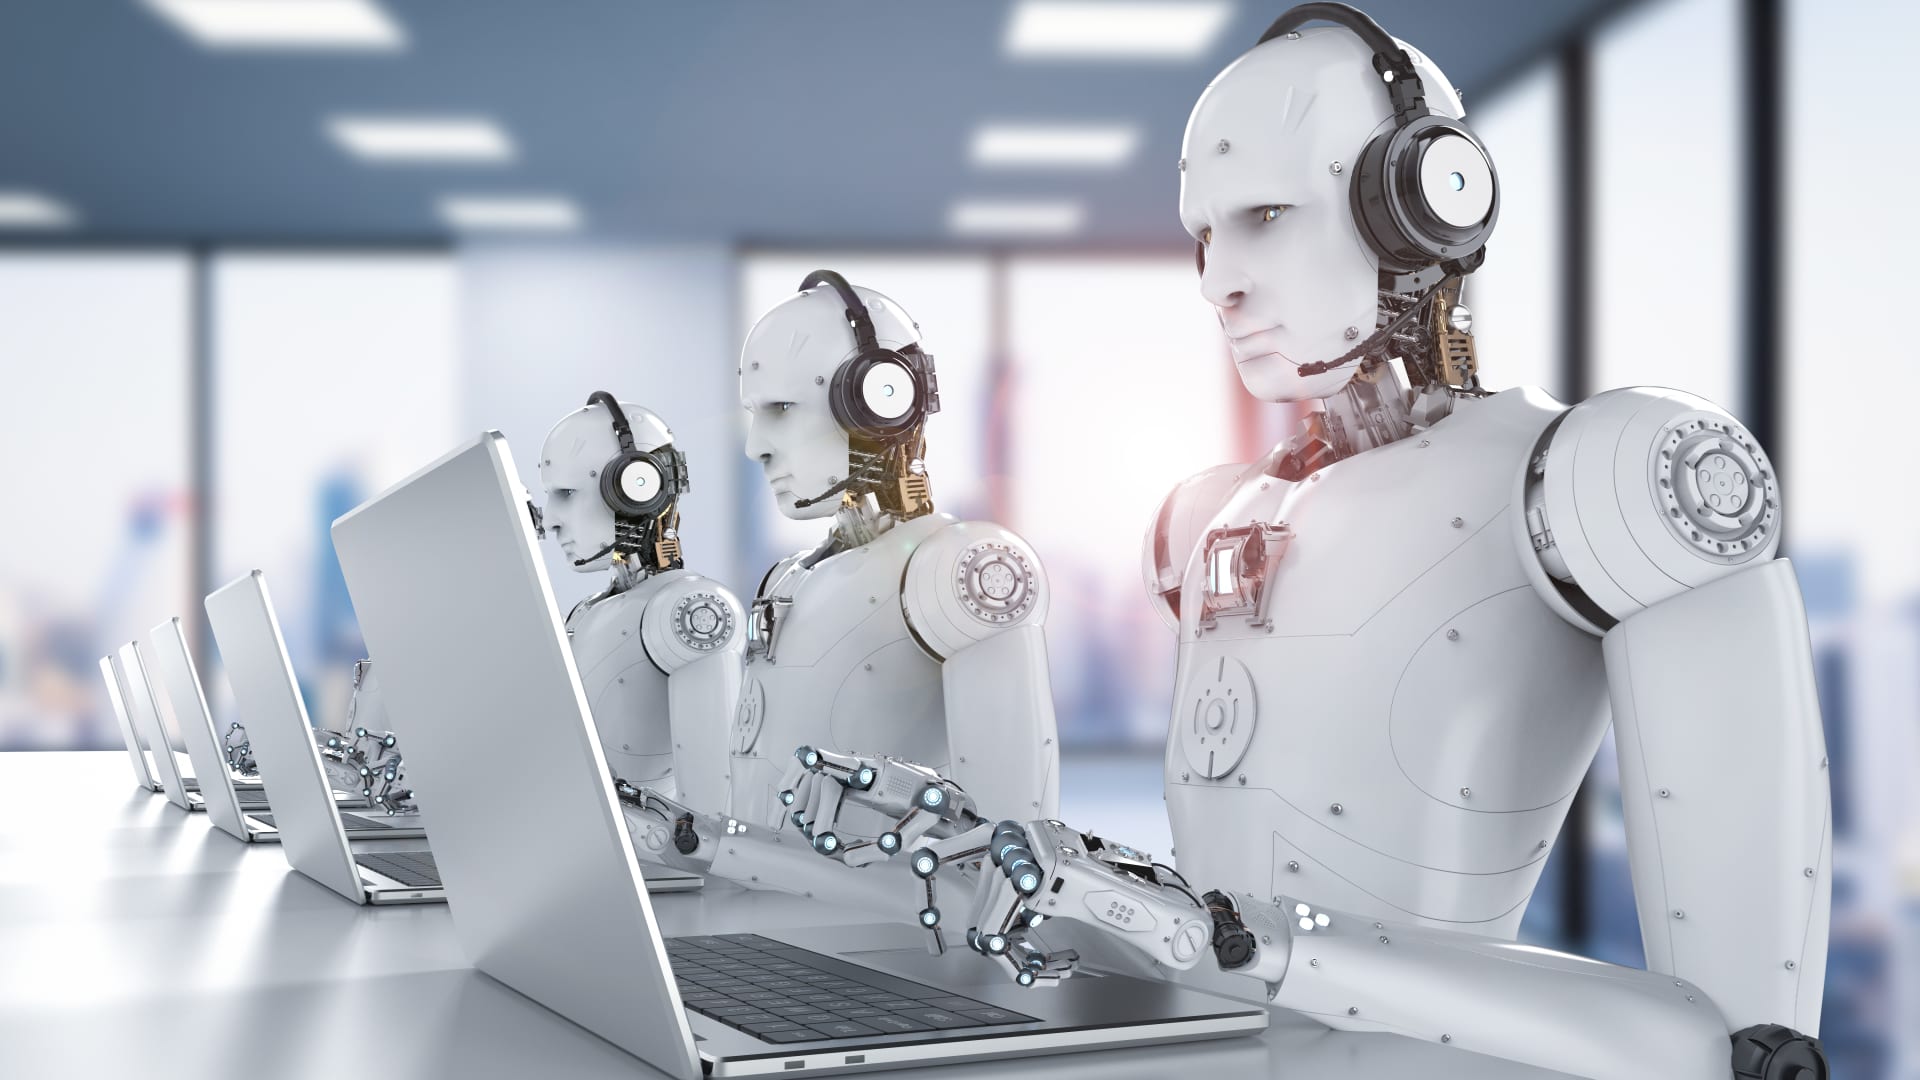 Tilsyneladende Dovenskab Numerisk Robots could take over 20 million jobs by 2030, study claims